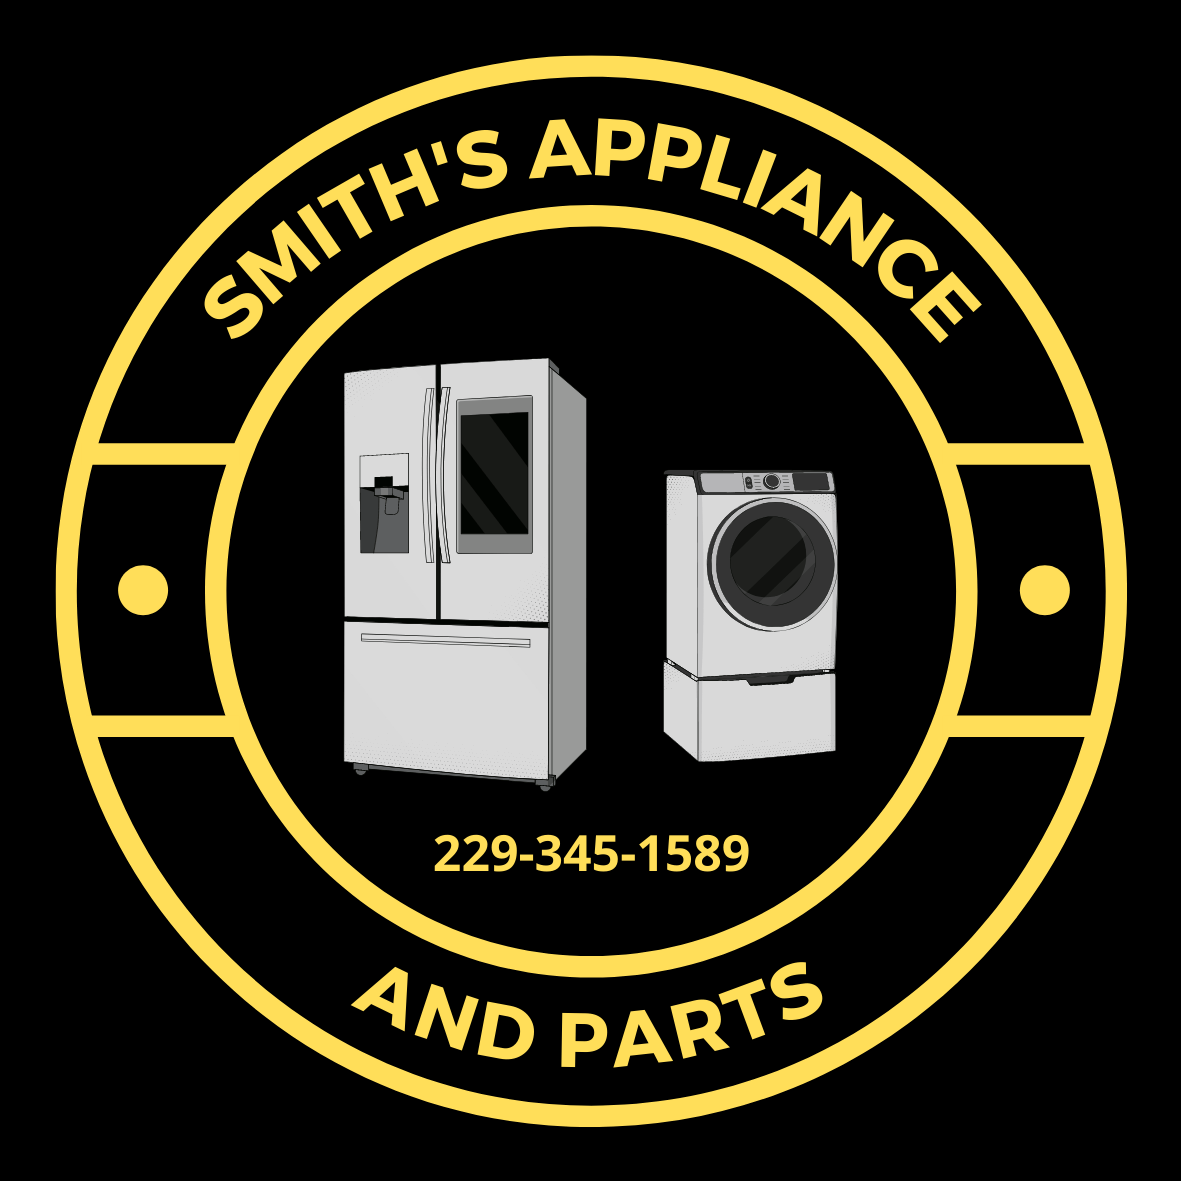 Smiths Appliance and Parts